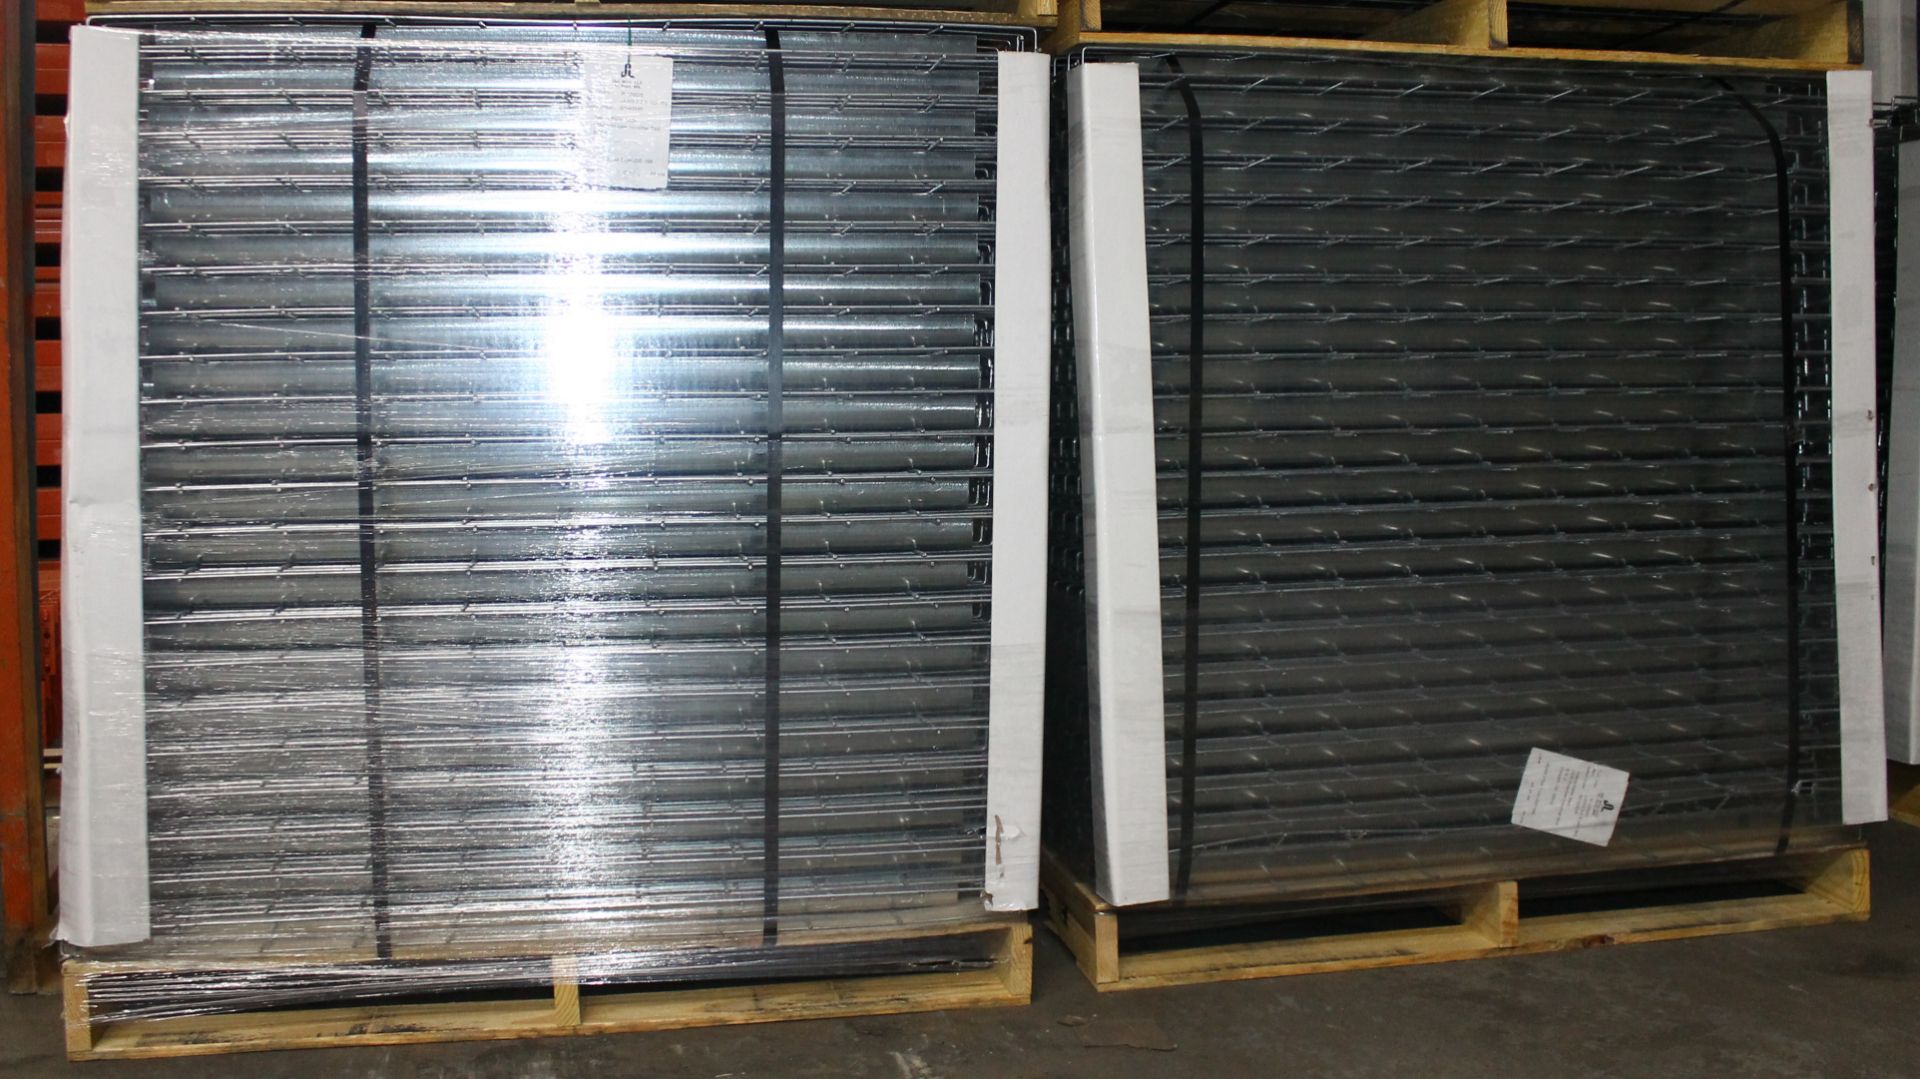 NEW 80 PCS OF STANDARD 42" X 53" WIREDECK - 2050 LBS CAPACITY - Image 3 of 3